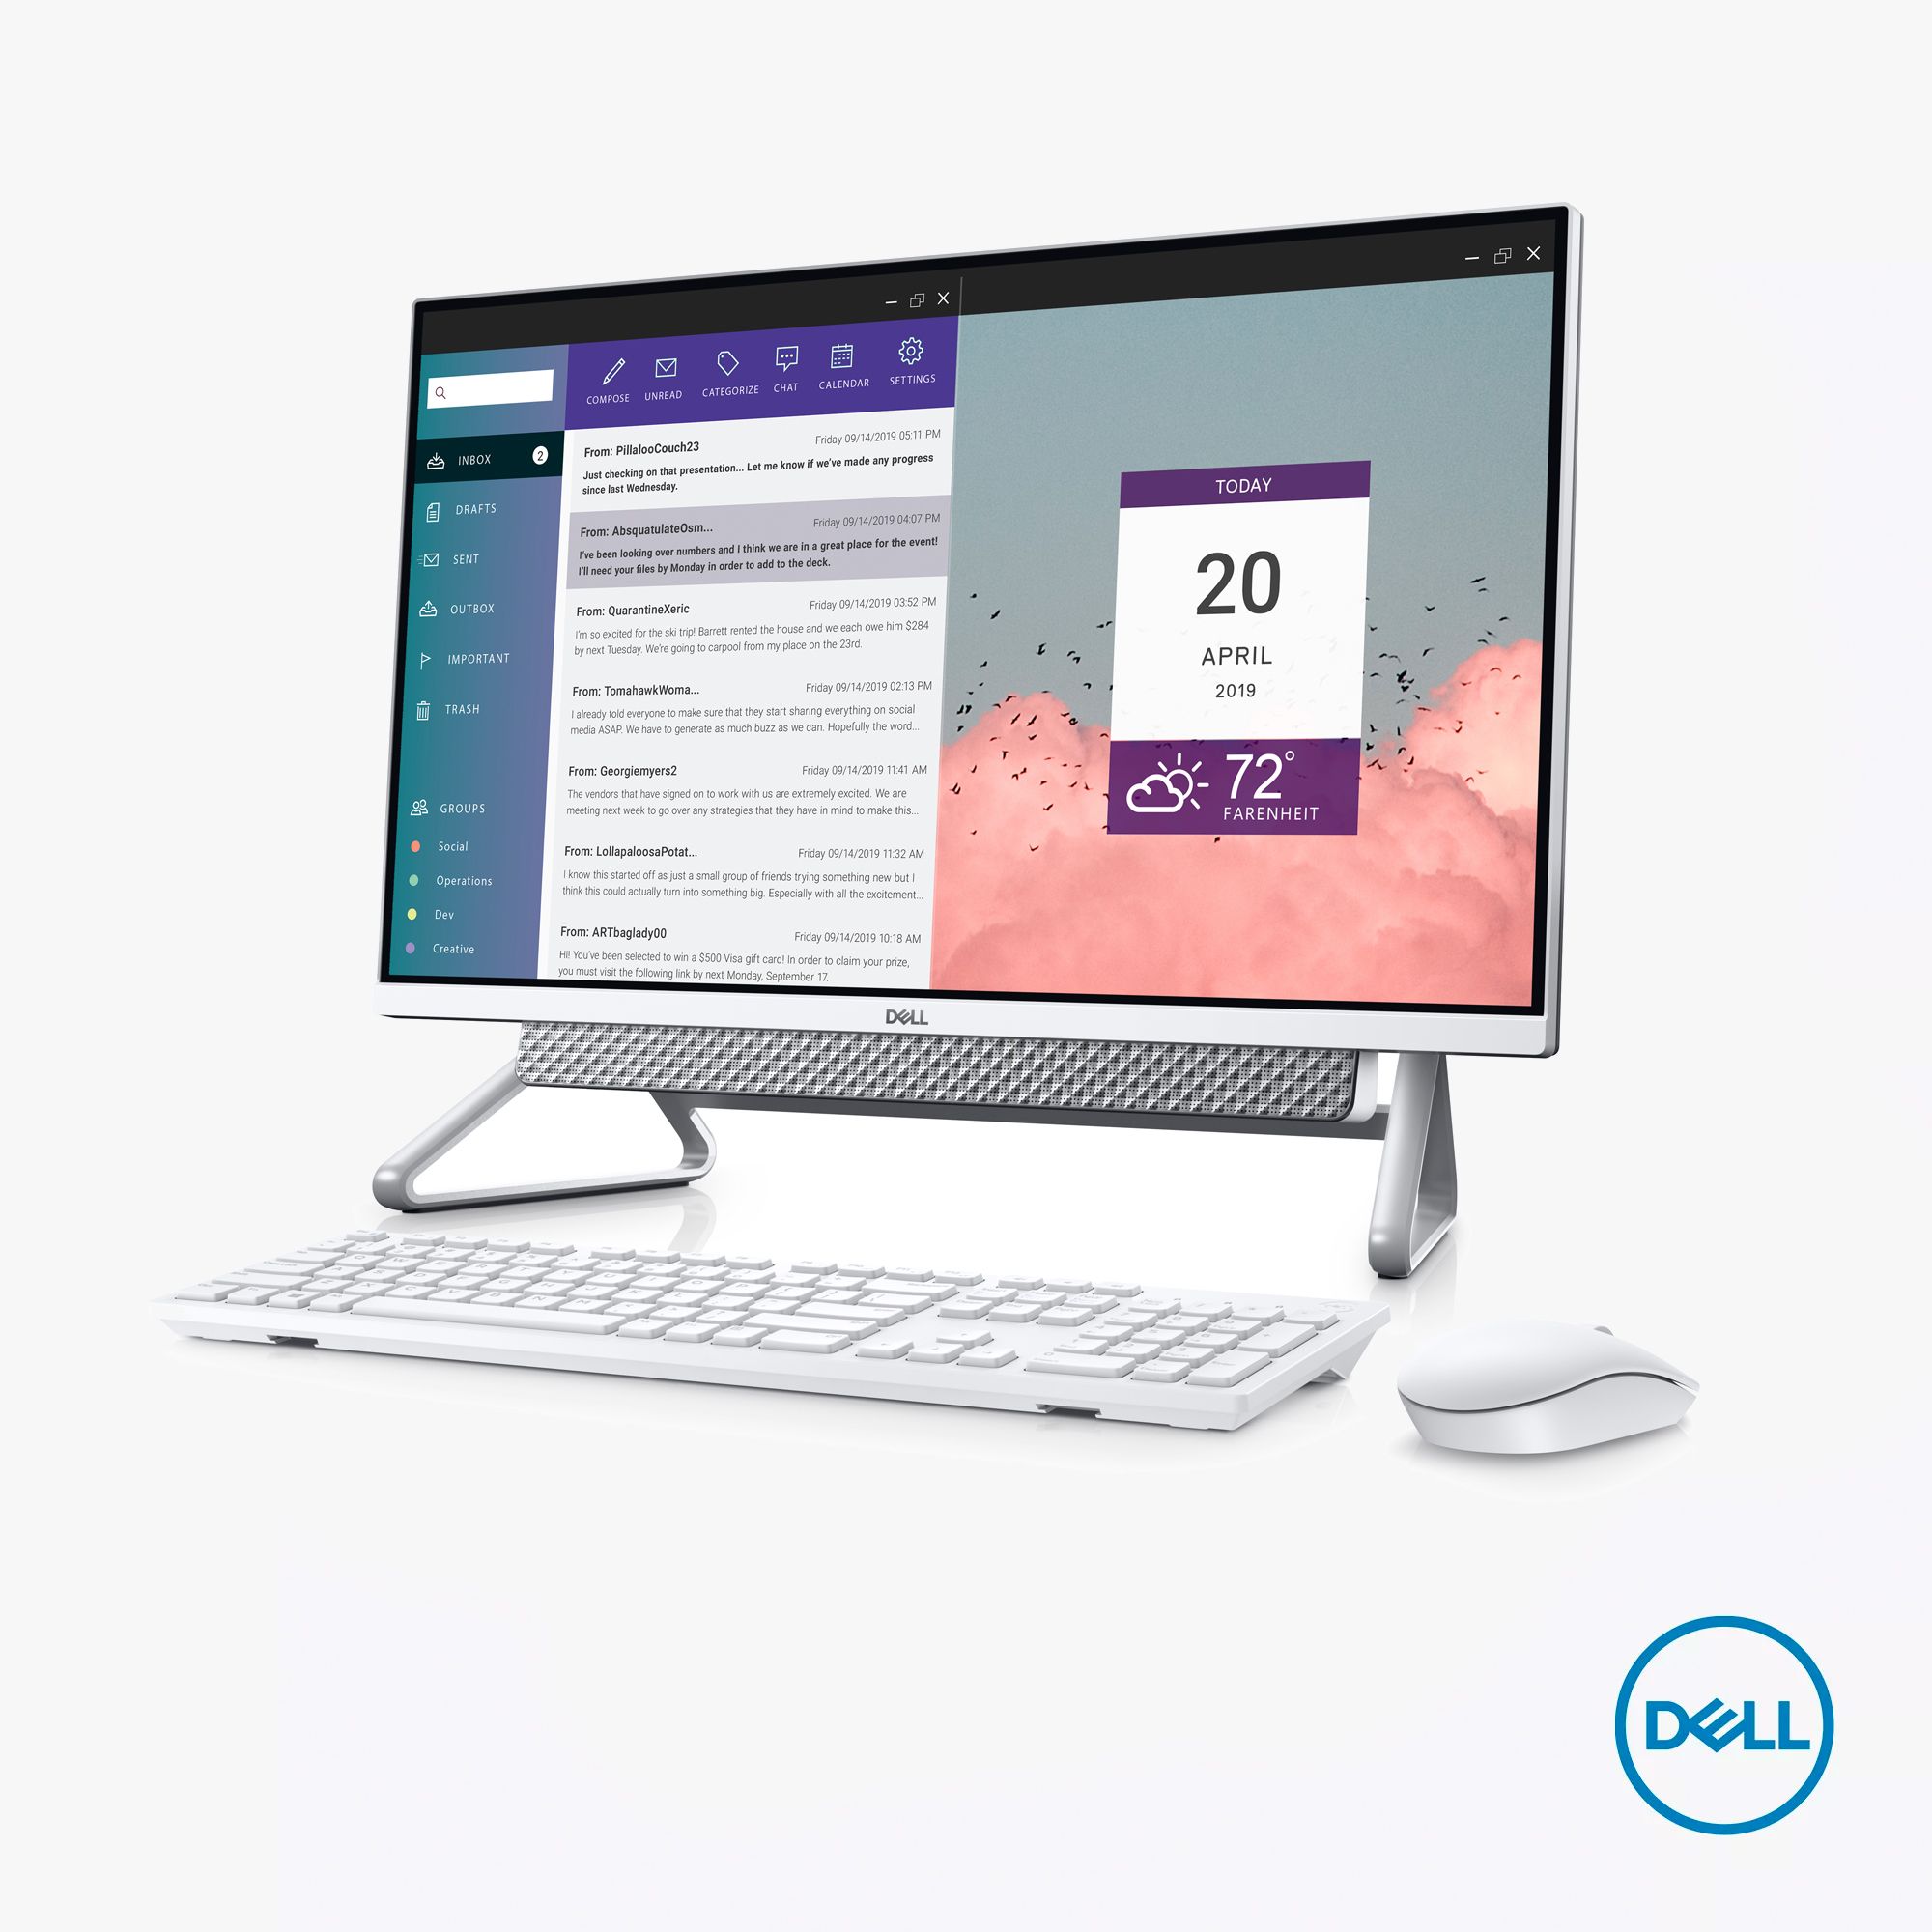 Dell AIO all in one